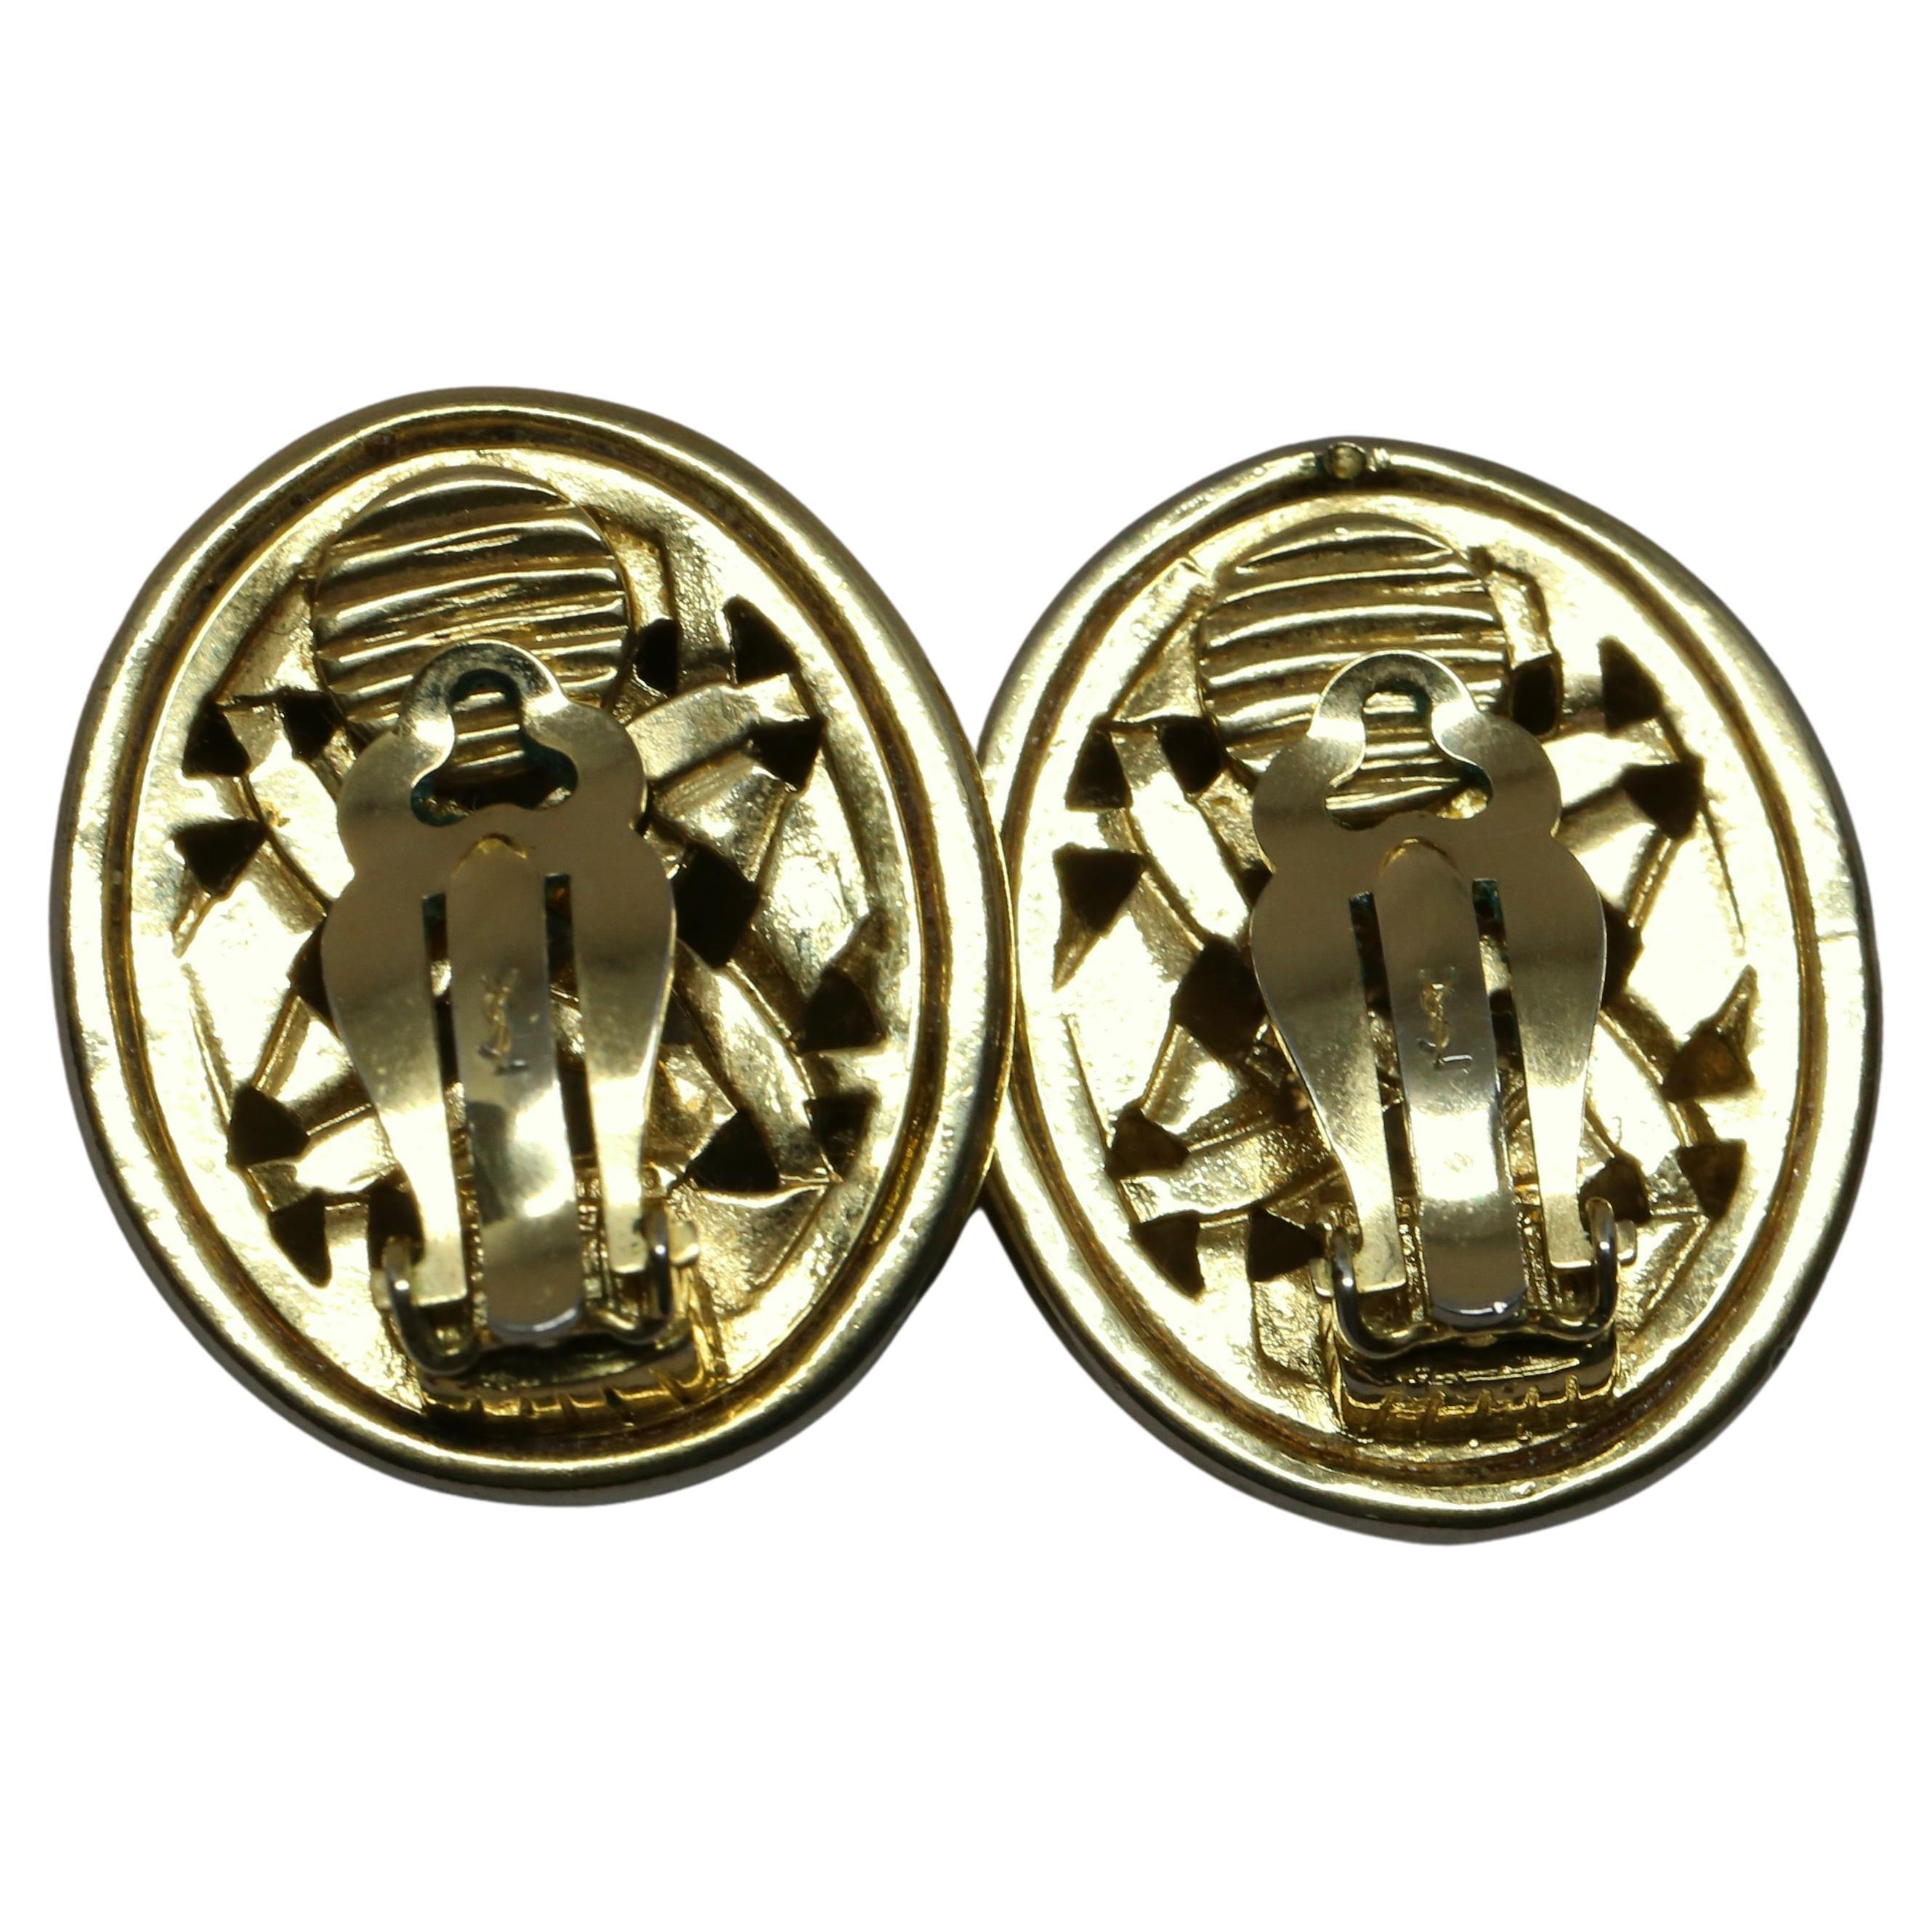 1980's YVES SAINT LAURENT organic shaped earrings in gilt metal   In Good Condition For Sale In San Fransisco, CA